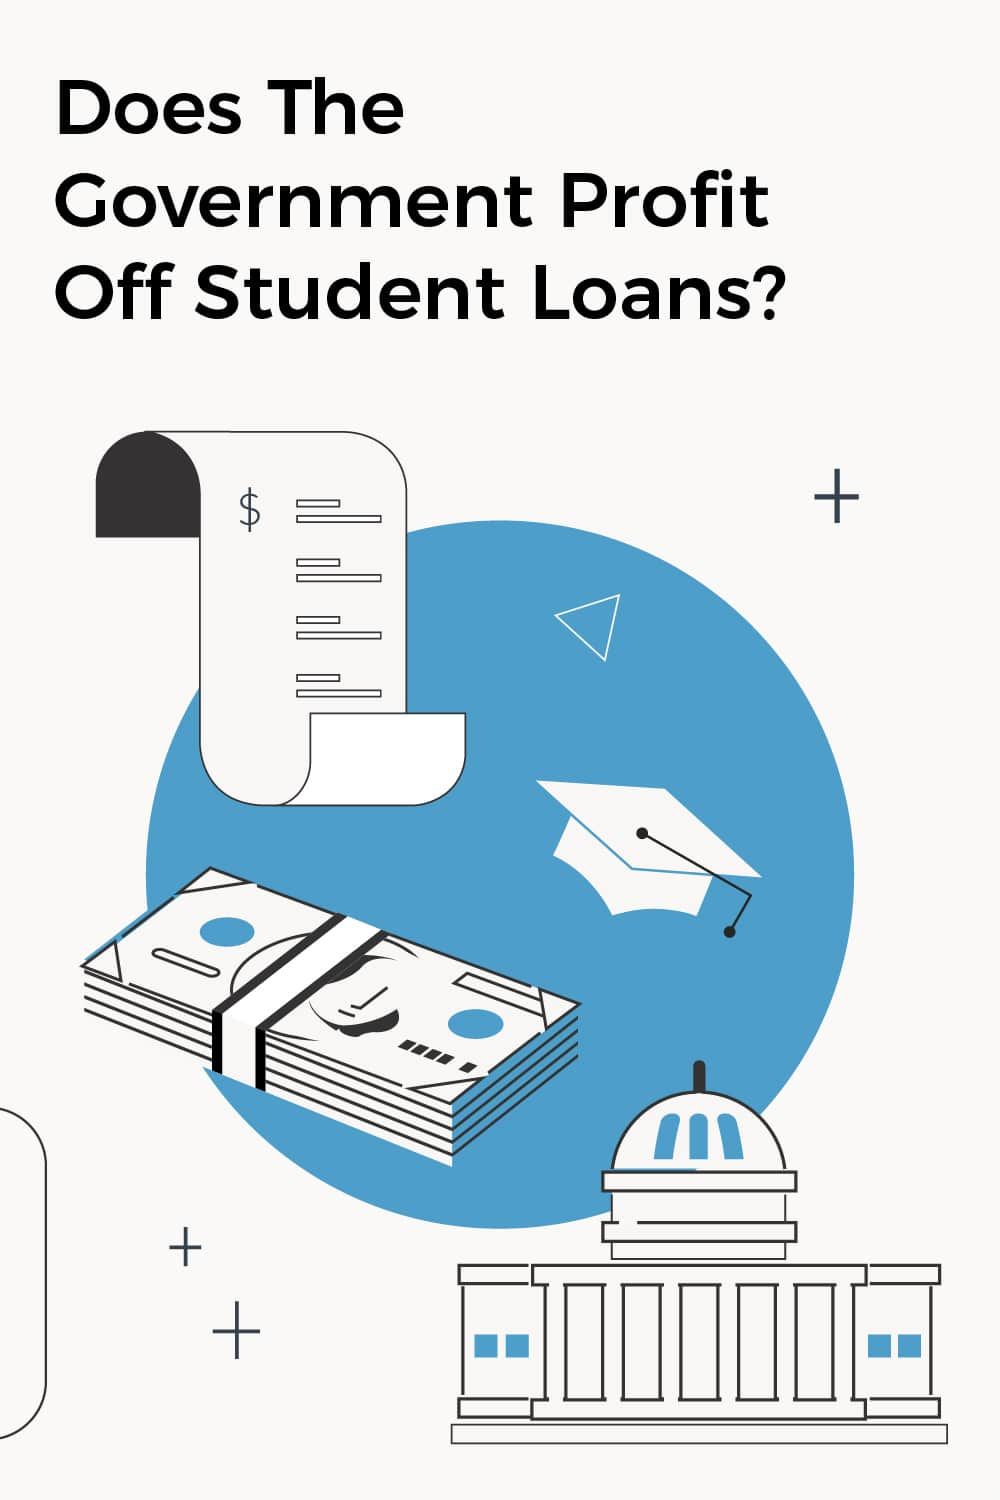 Does The Government Profit Off Student Loans?